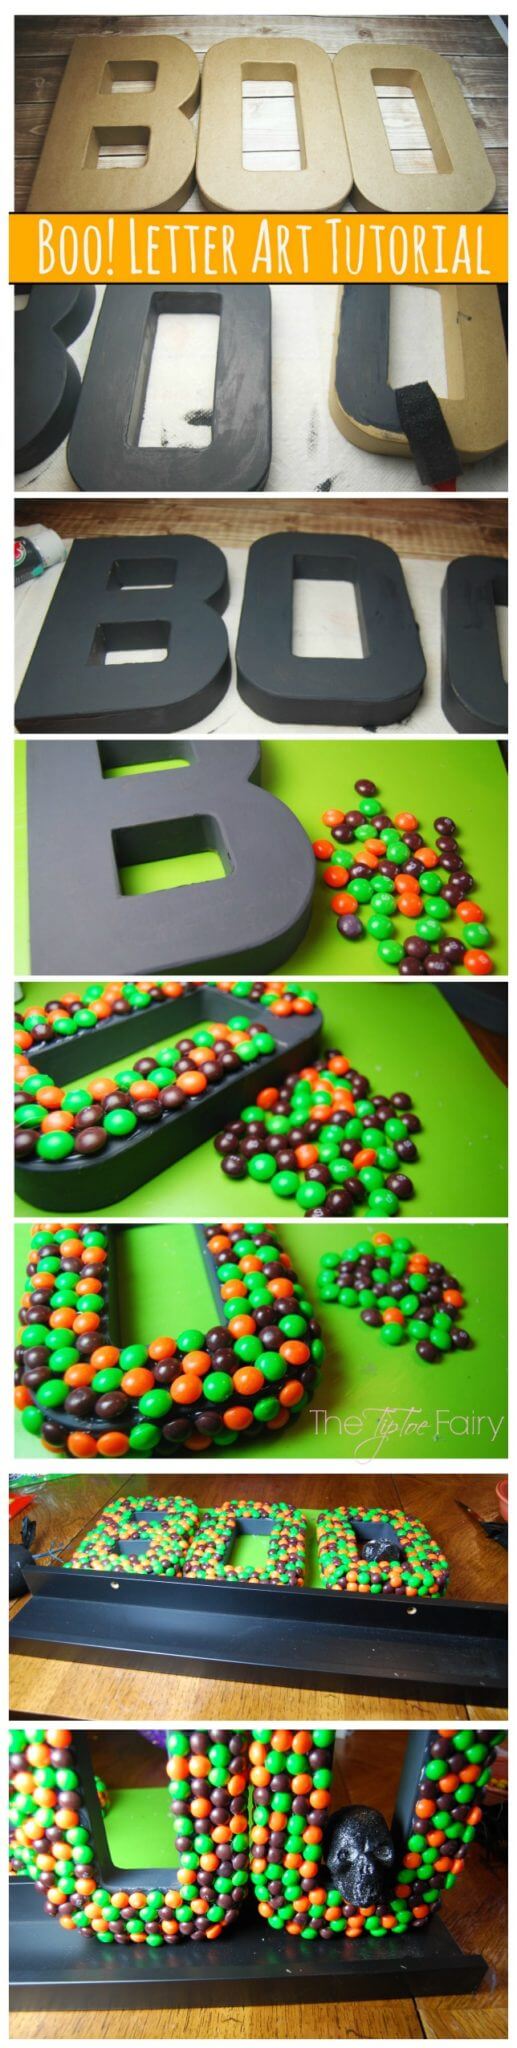 Halloween Letter Art Tutorial with Skittles Candy | The TipToe Fairy A fun DIY Halloween Decor featuring Skittles candies! You can totally make this! @SamsClub #SweetOrTreat #cbias #shop #candycrafting #tutorial #halloweendecor #halloween #halloweenDIY #DIY #ikeahack